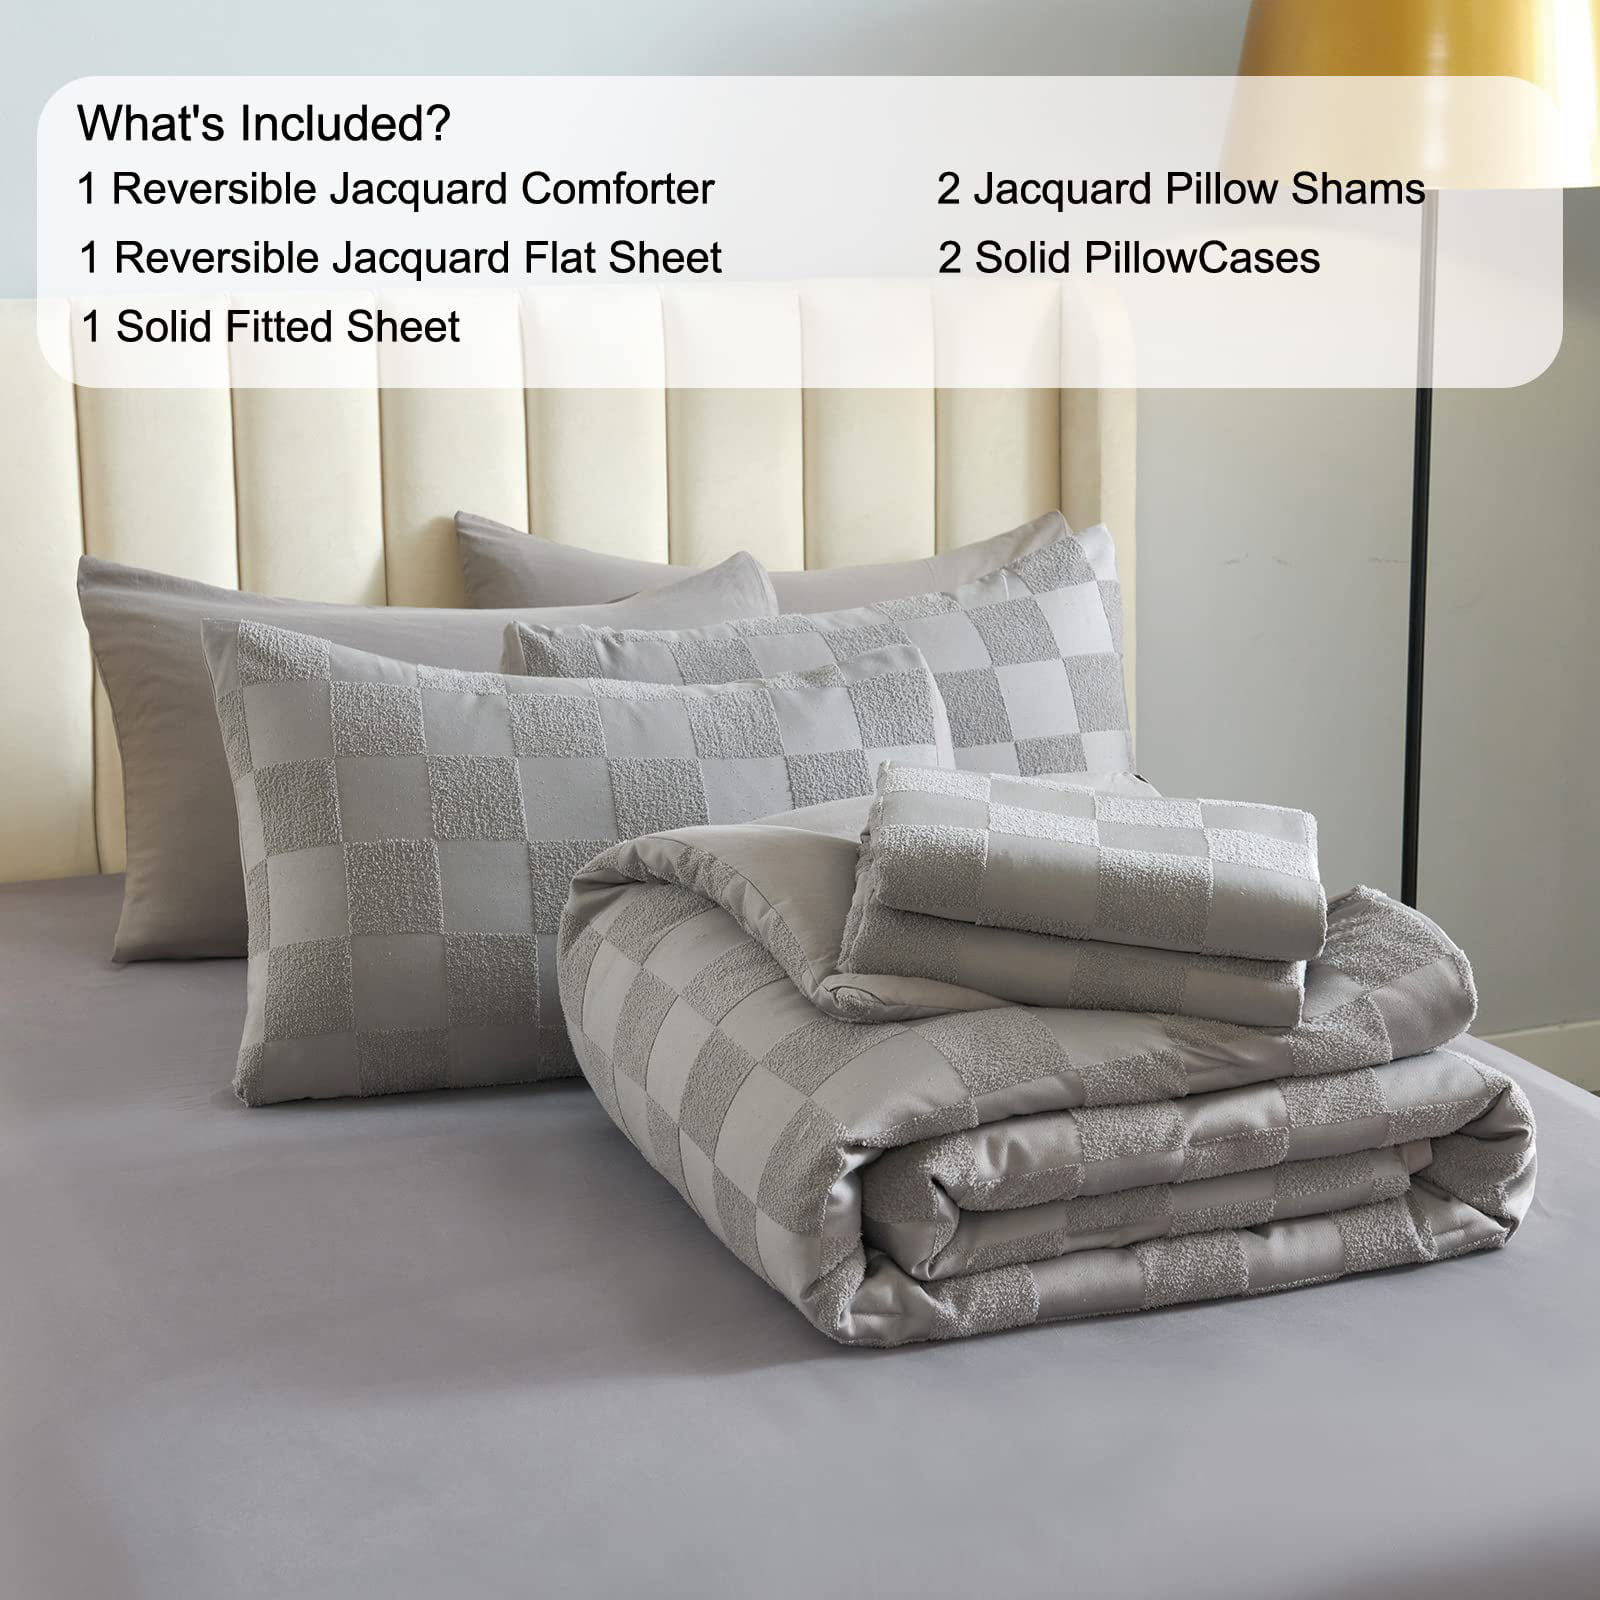 BESTCHIC 7 Piece Grid Bed in a Bag, Grey Plaid Comforter Set King Size,  Embroidery Shabby Chic Tufte…See more BESTCHIC 7 Piece Grid Bed in a Bag,  Grey